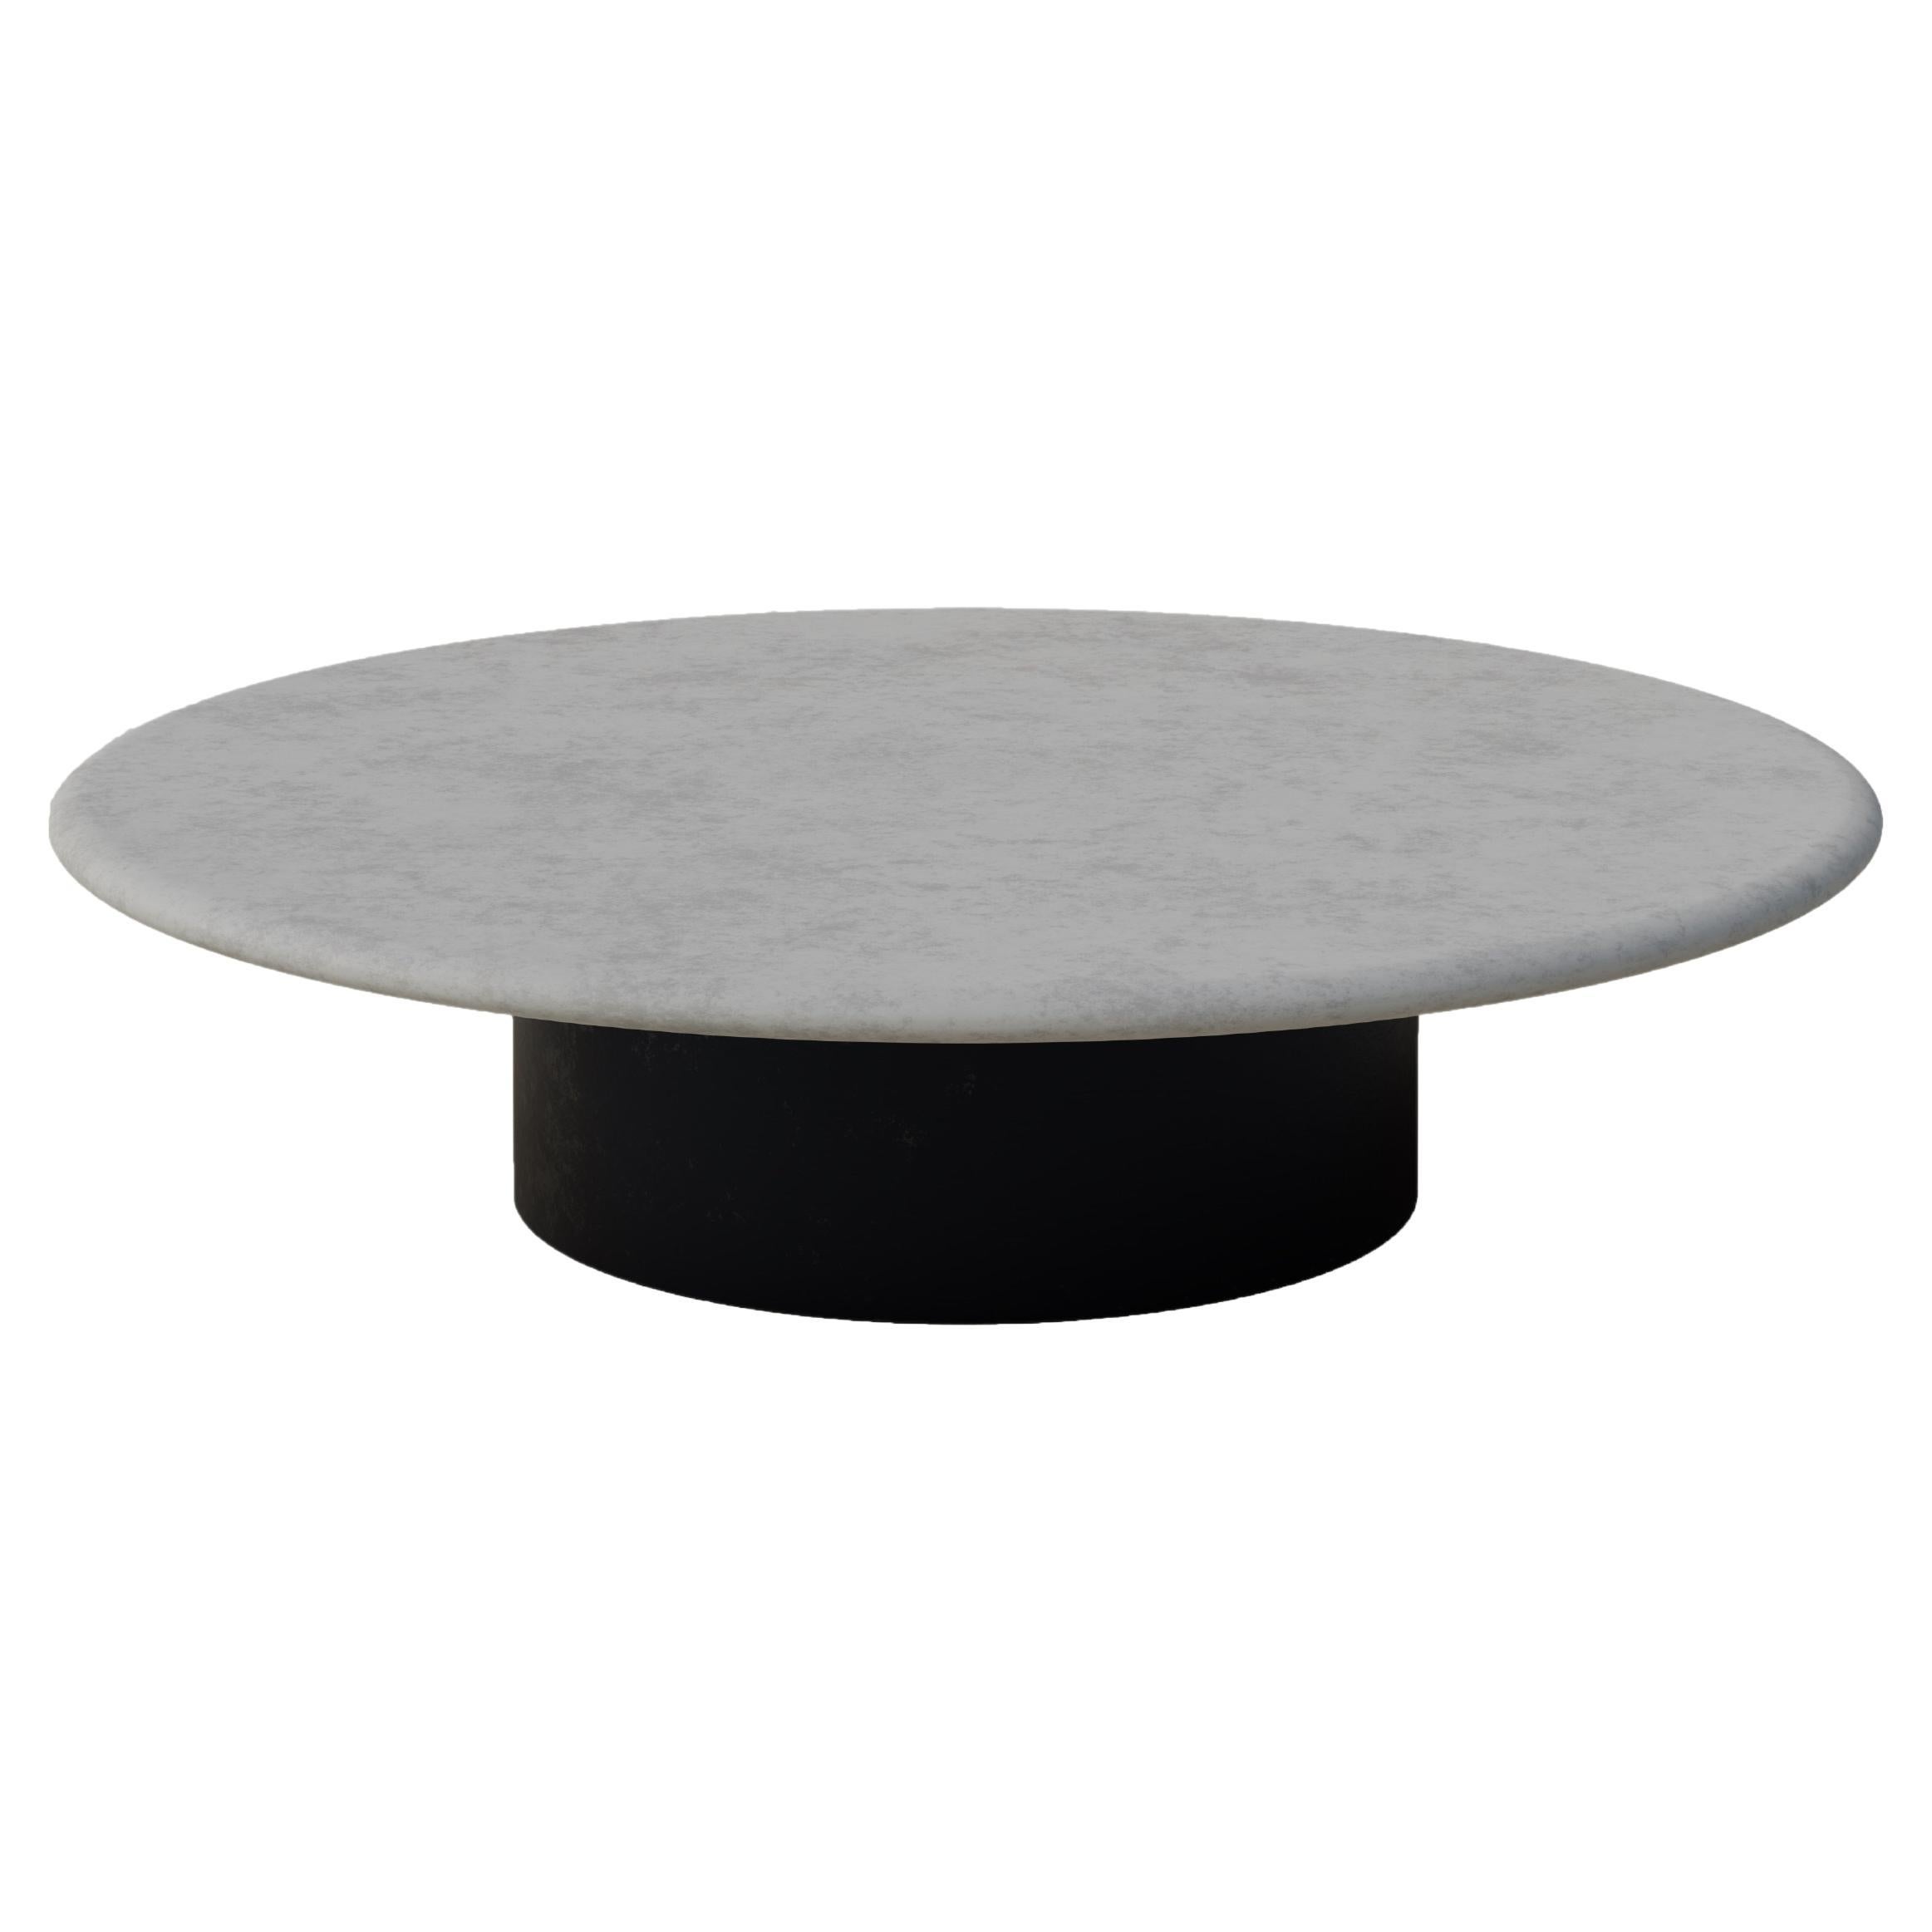 Raindrop Coffee Table, 1000, Microcrete / Patinated For Sale